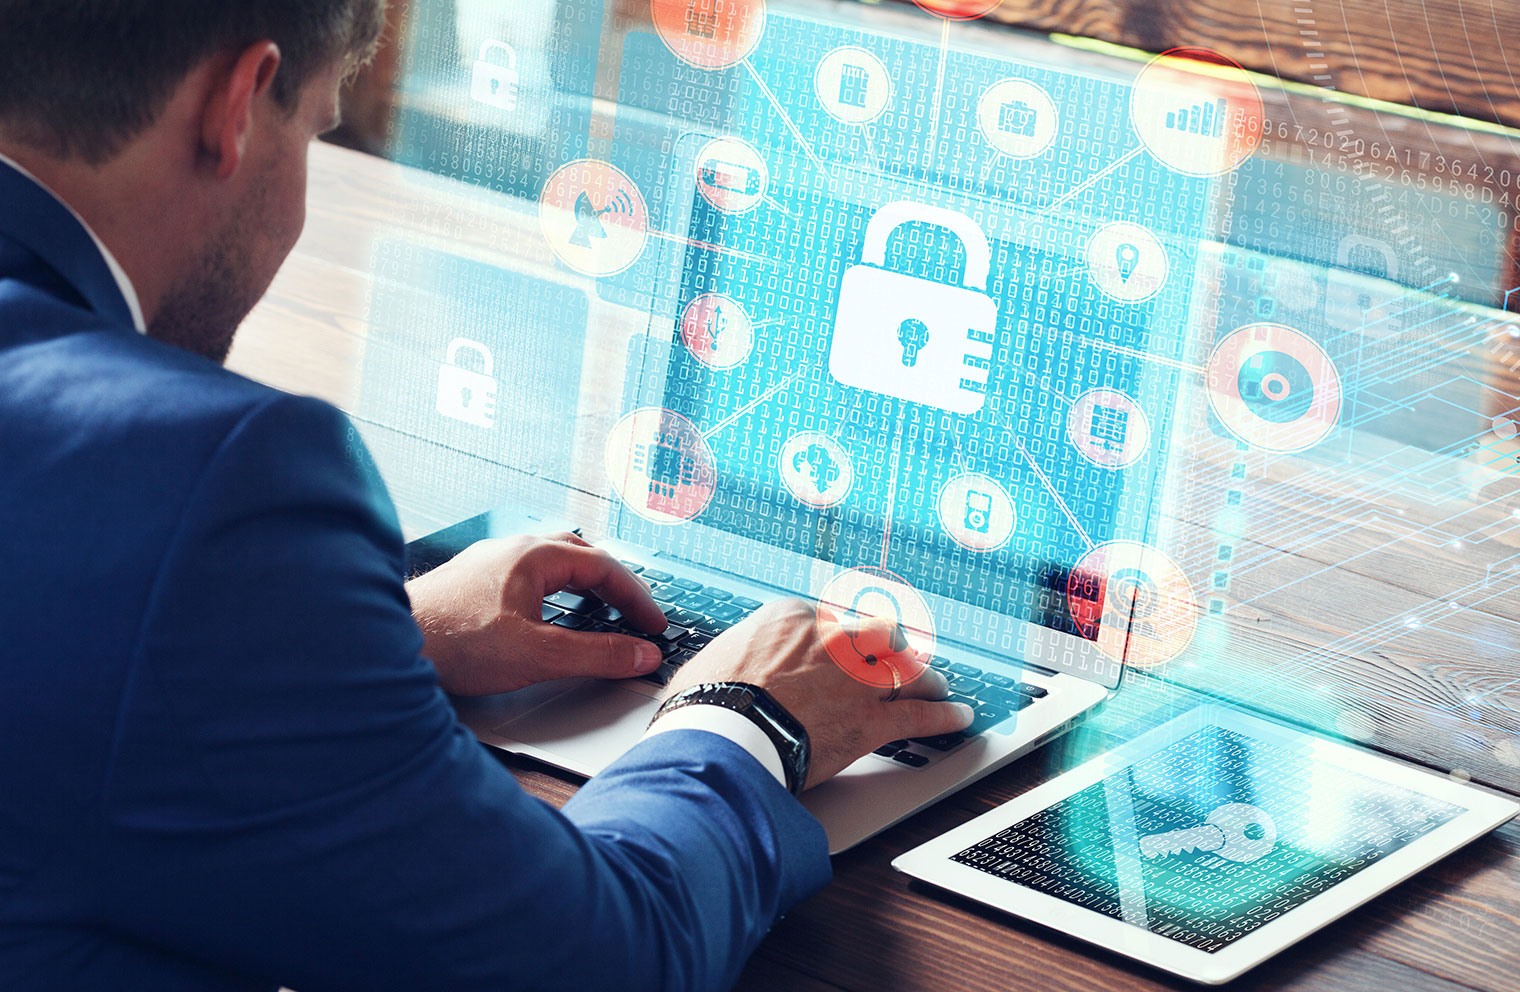 Image of padlock and security graphics overlaying image of man at desk with laptop 